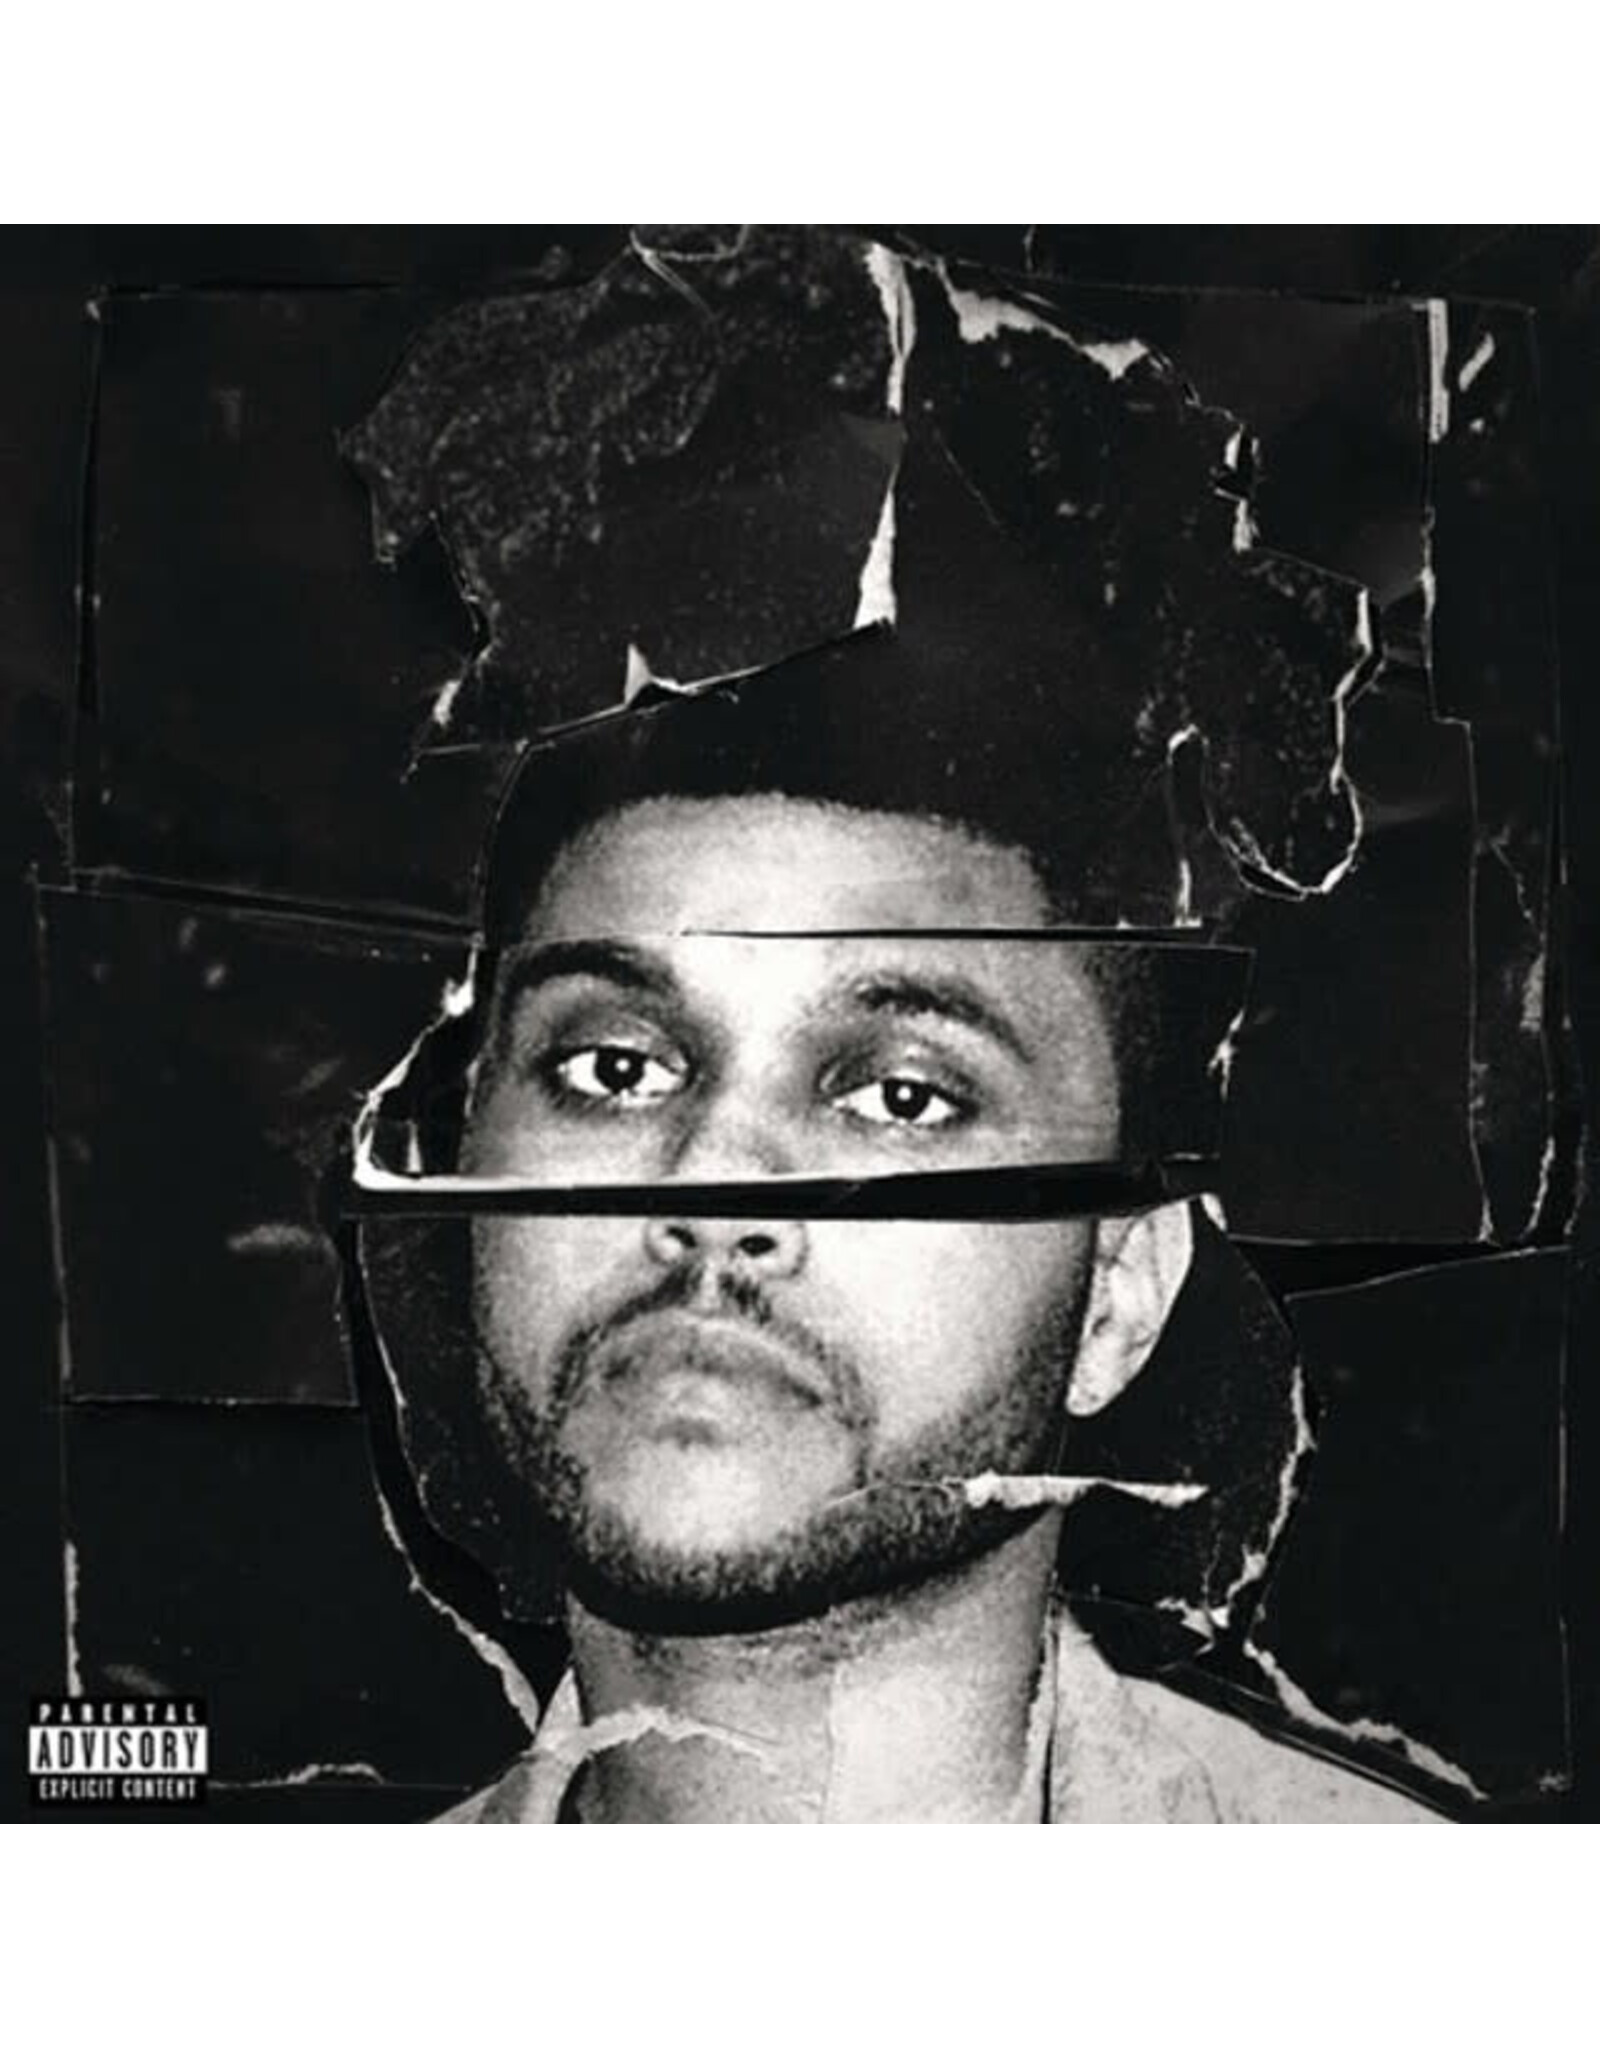 Republic Weeknd: Beauty Behind The Madness LP